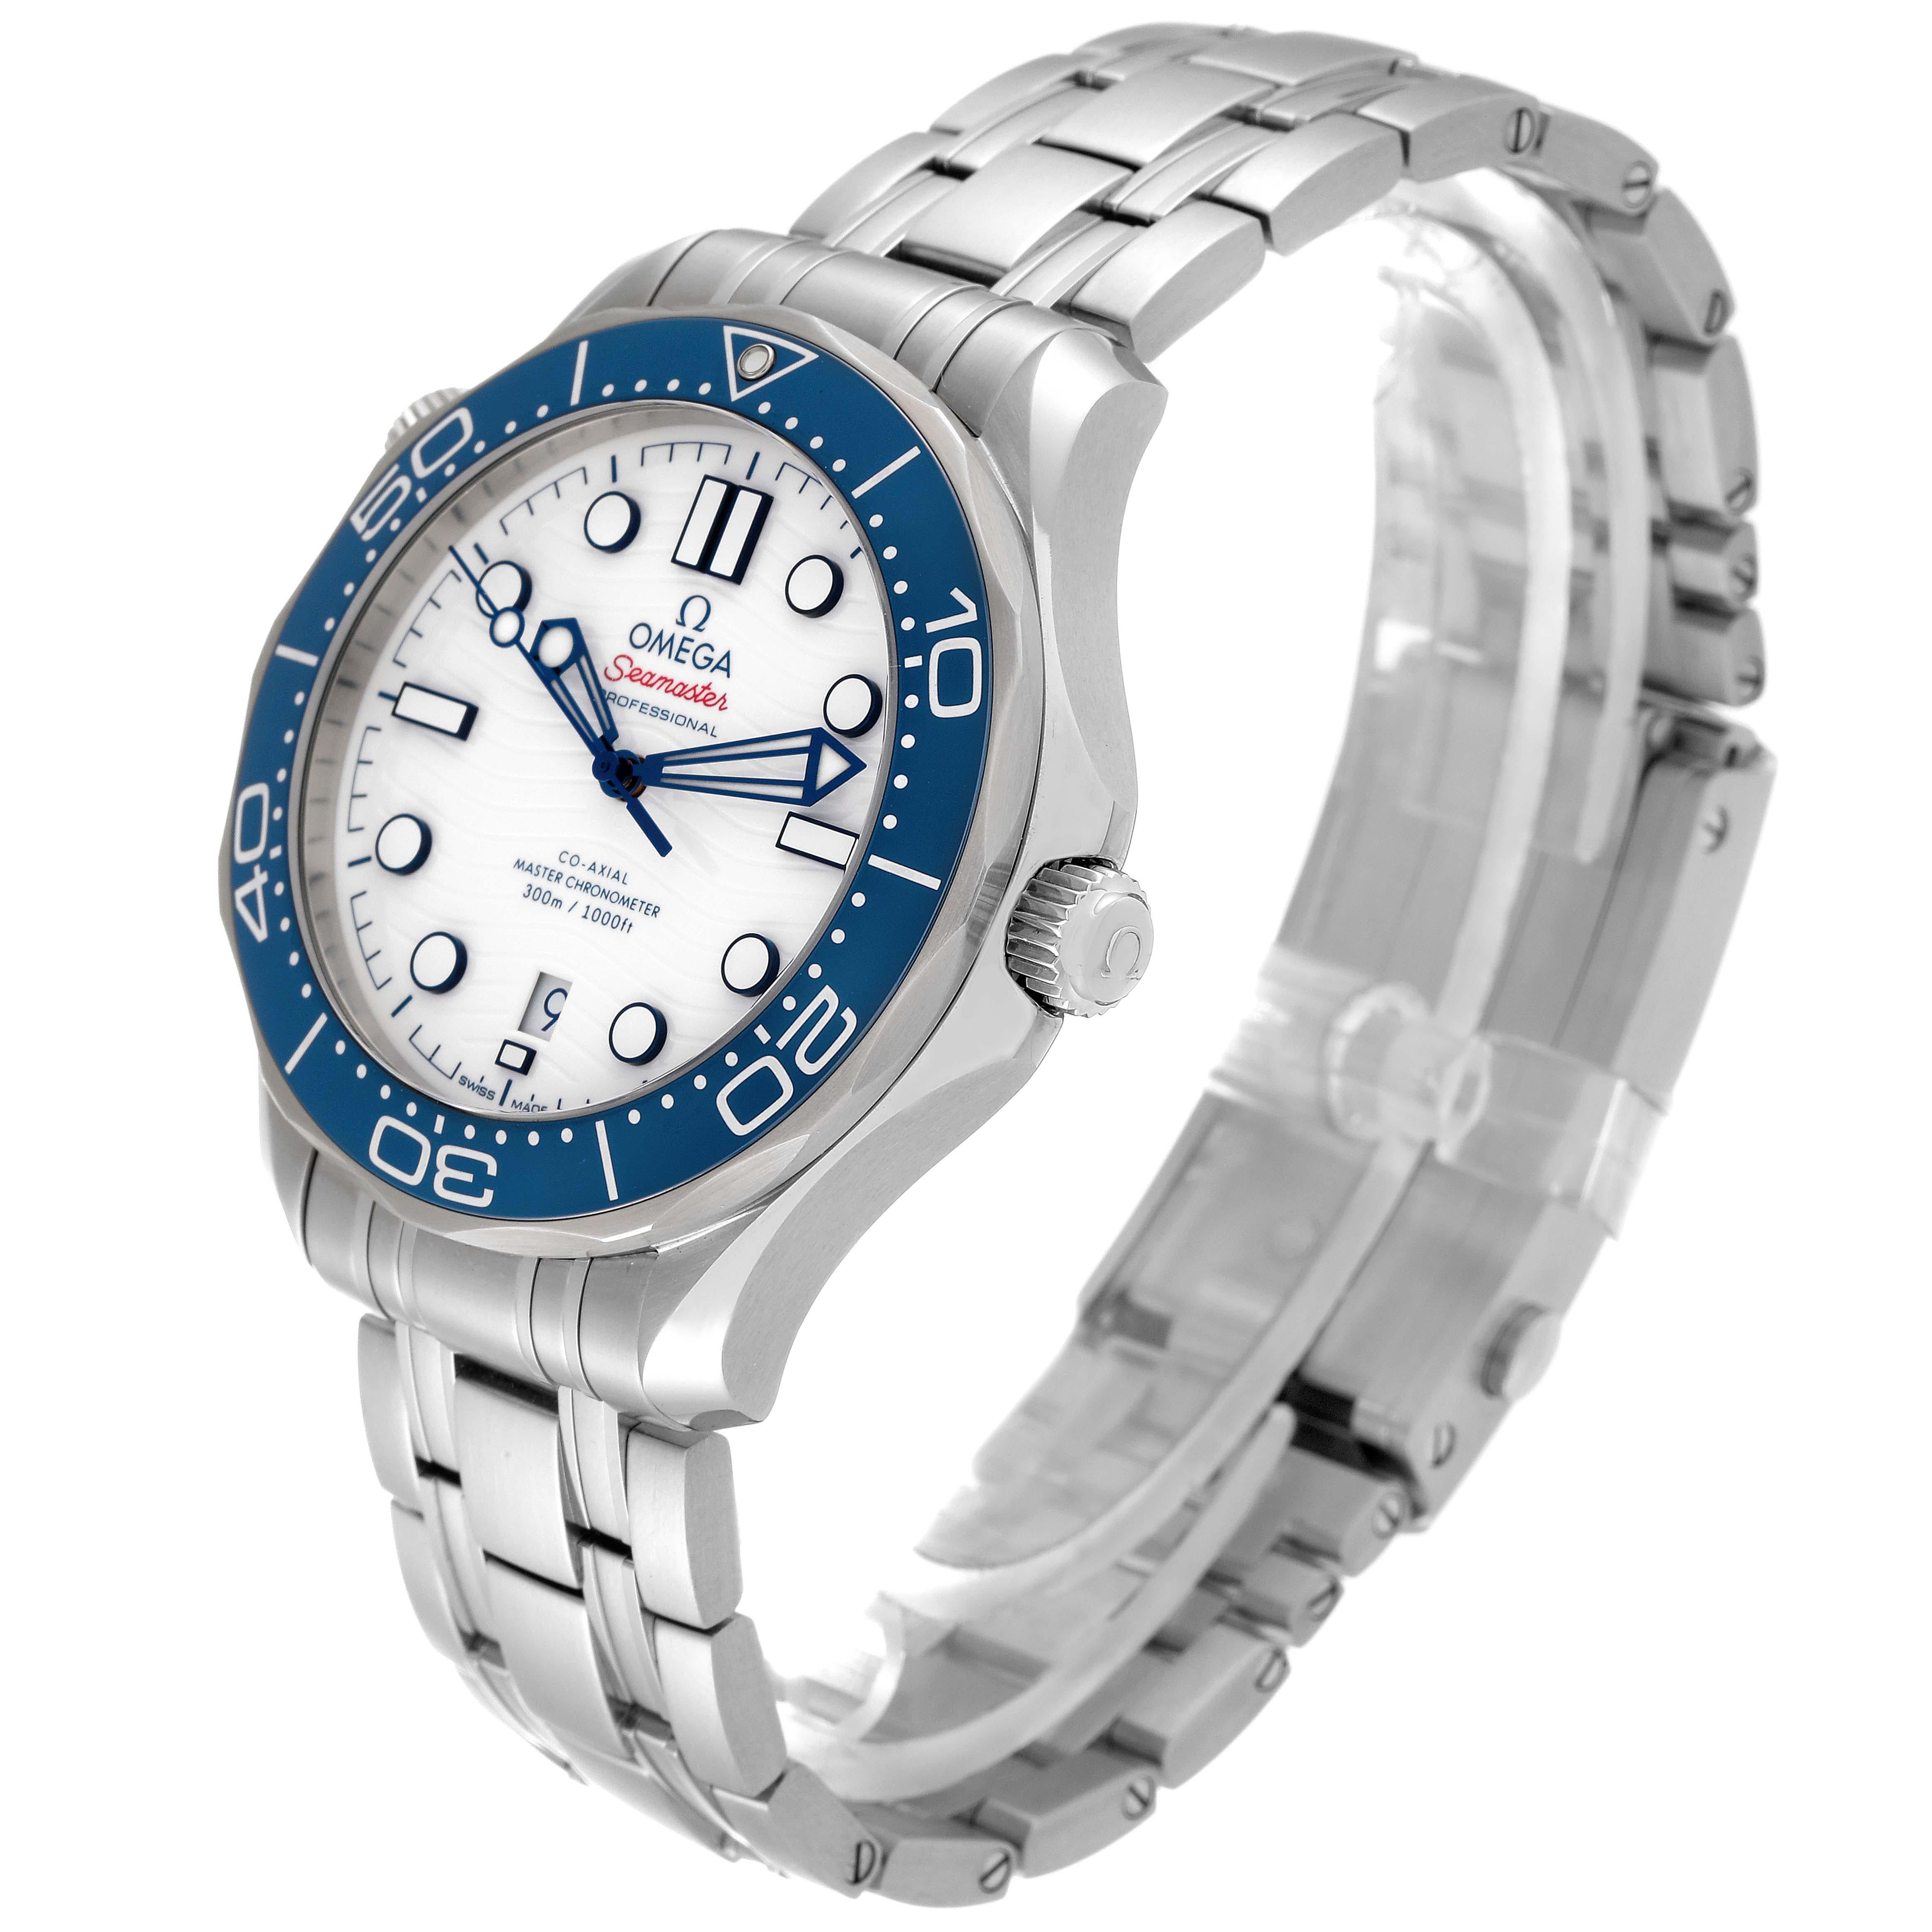 Men's Omega Seamaster Tokyo 2020 Limited Edition Steel Mens Watch 522.30.42.20.04.001 